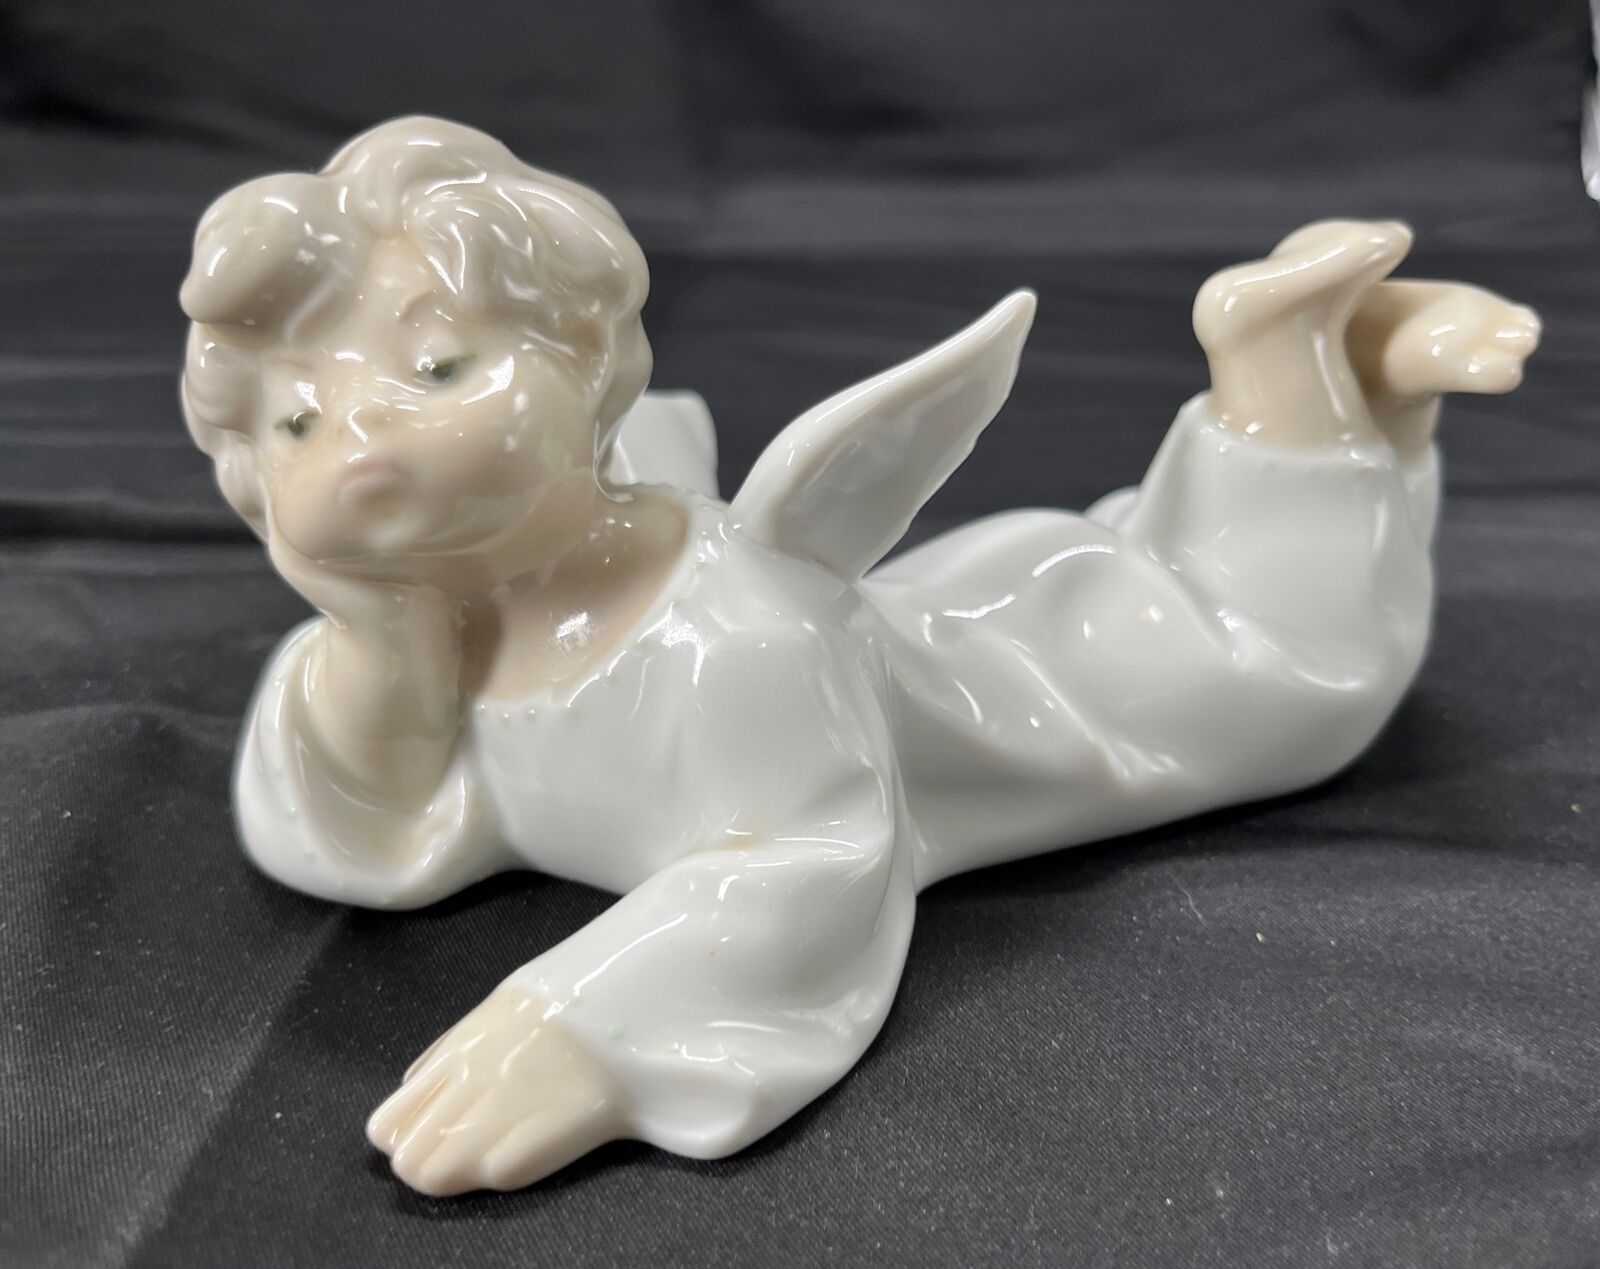 Lladro “Angel Laying Down” Porcelain Figurine #4541 (Retired)